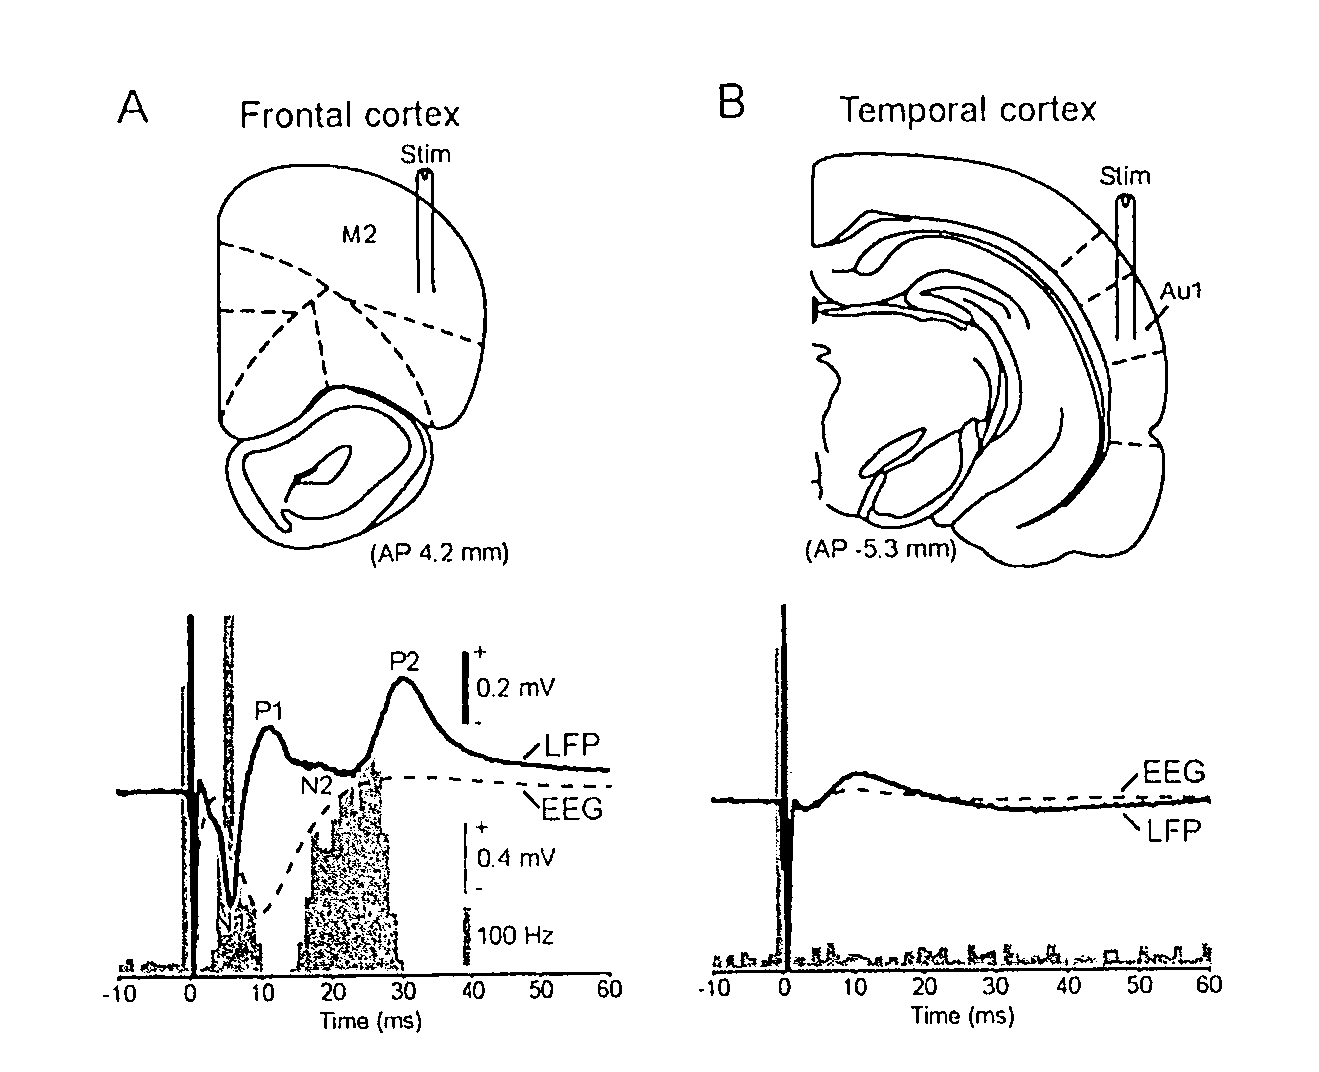 Methods of neural centre location and electrode placement in the central nervous system